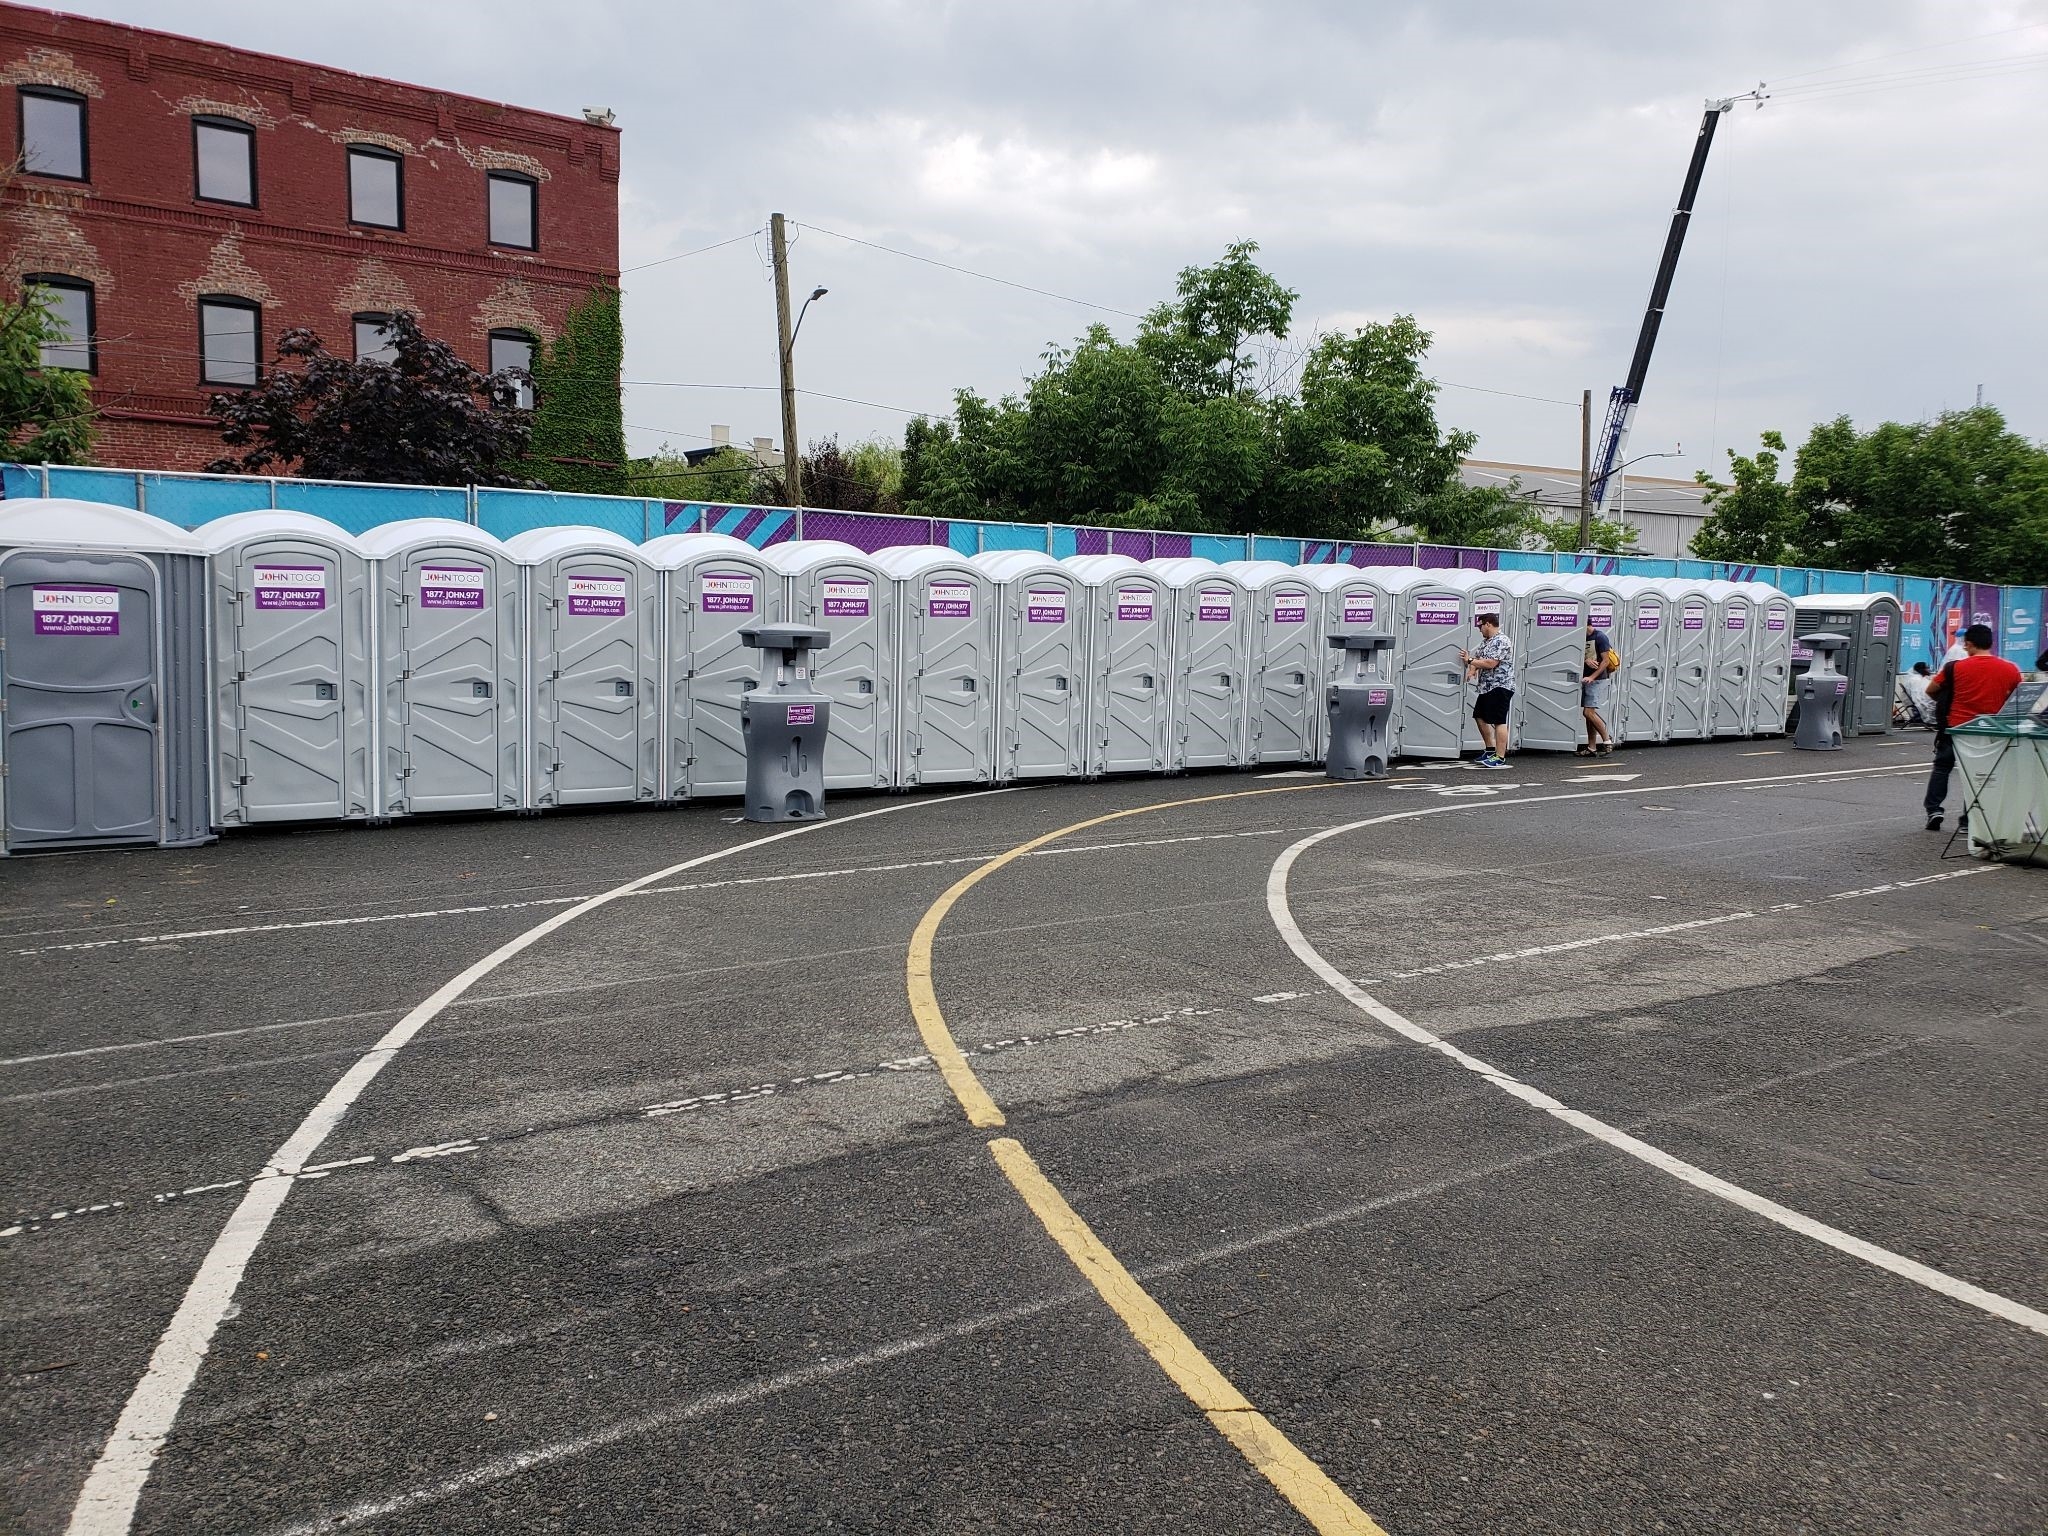 Portable toilets at event